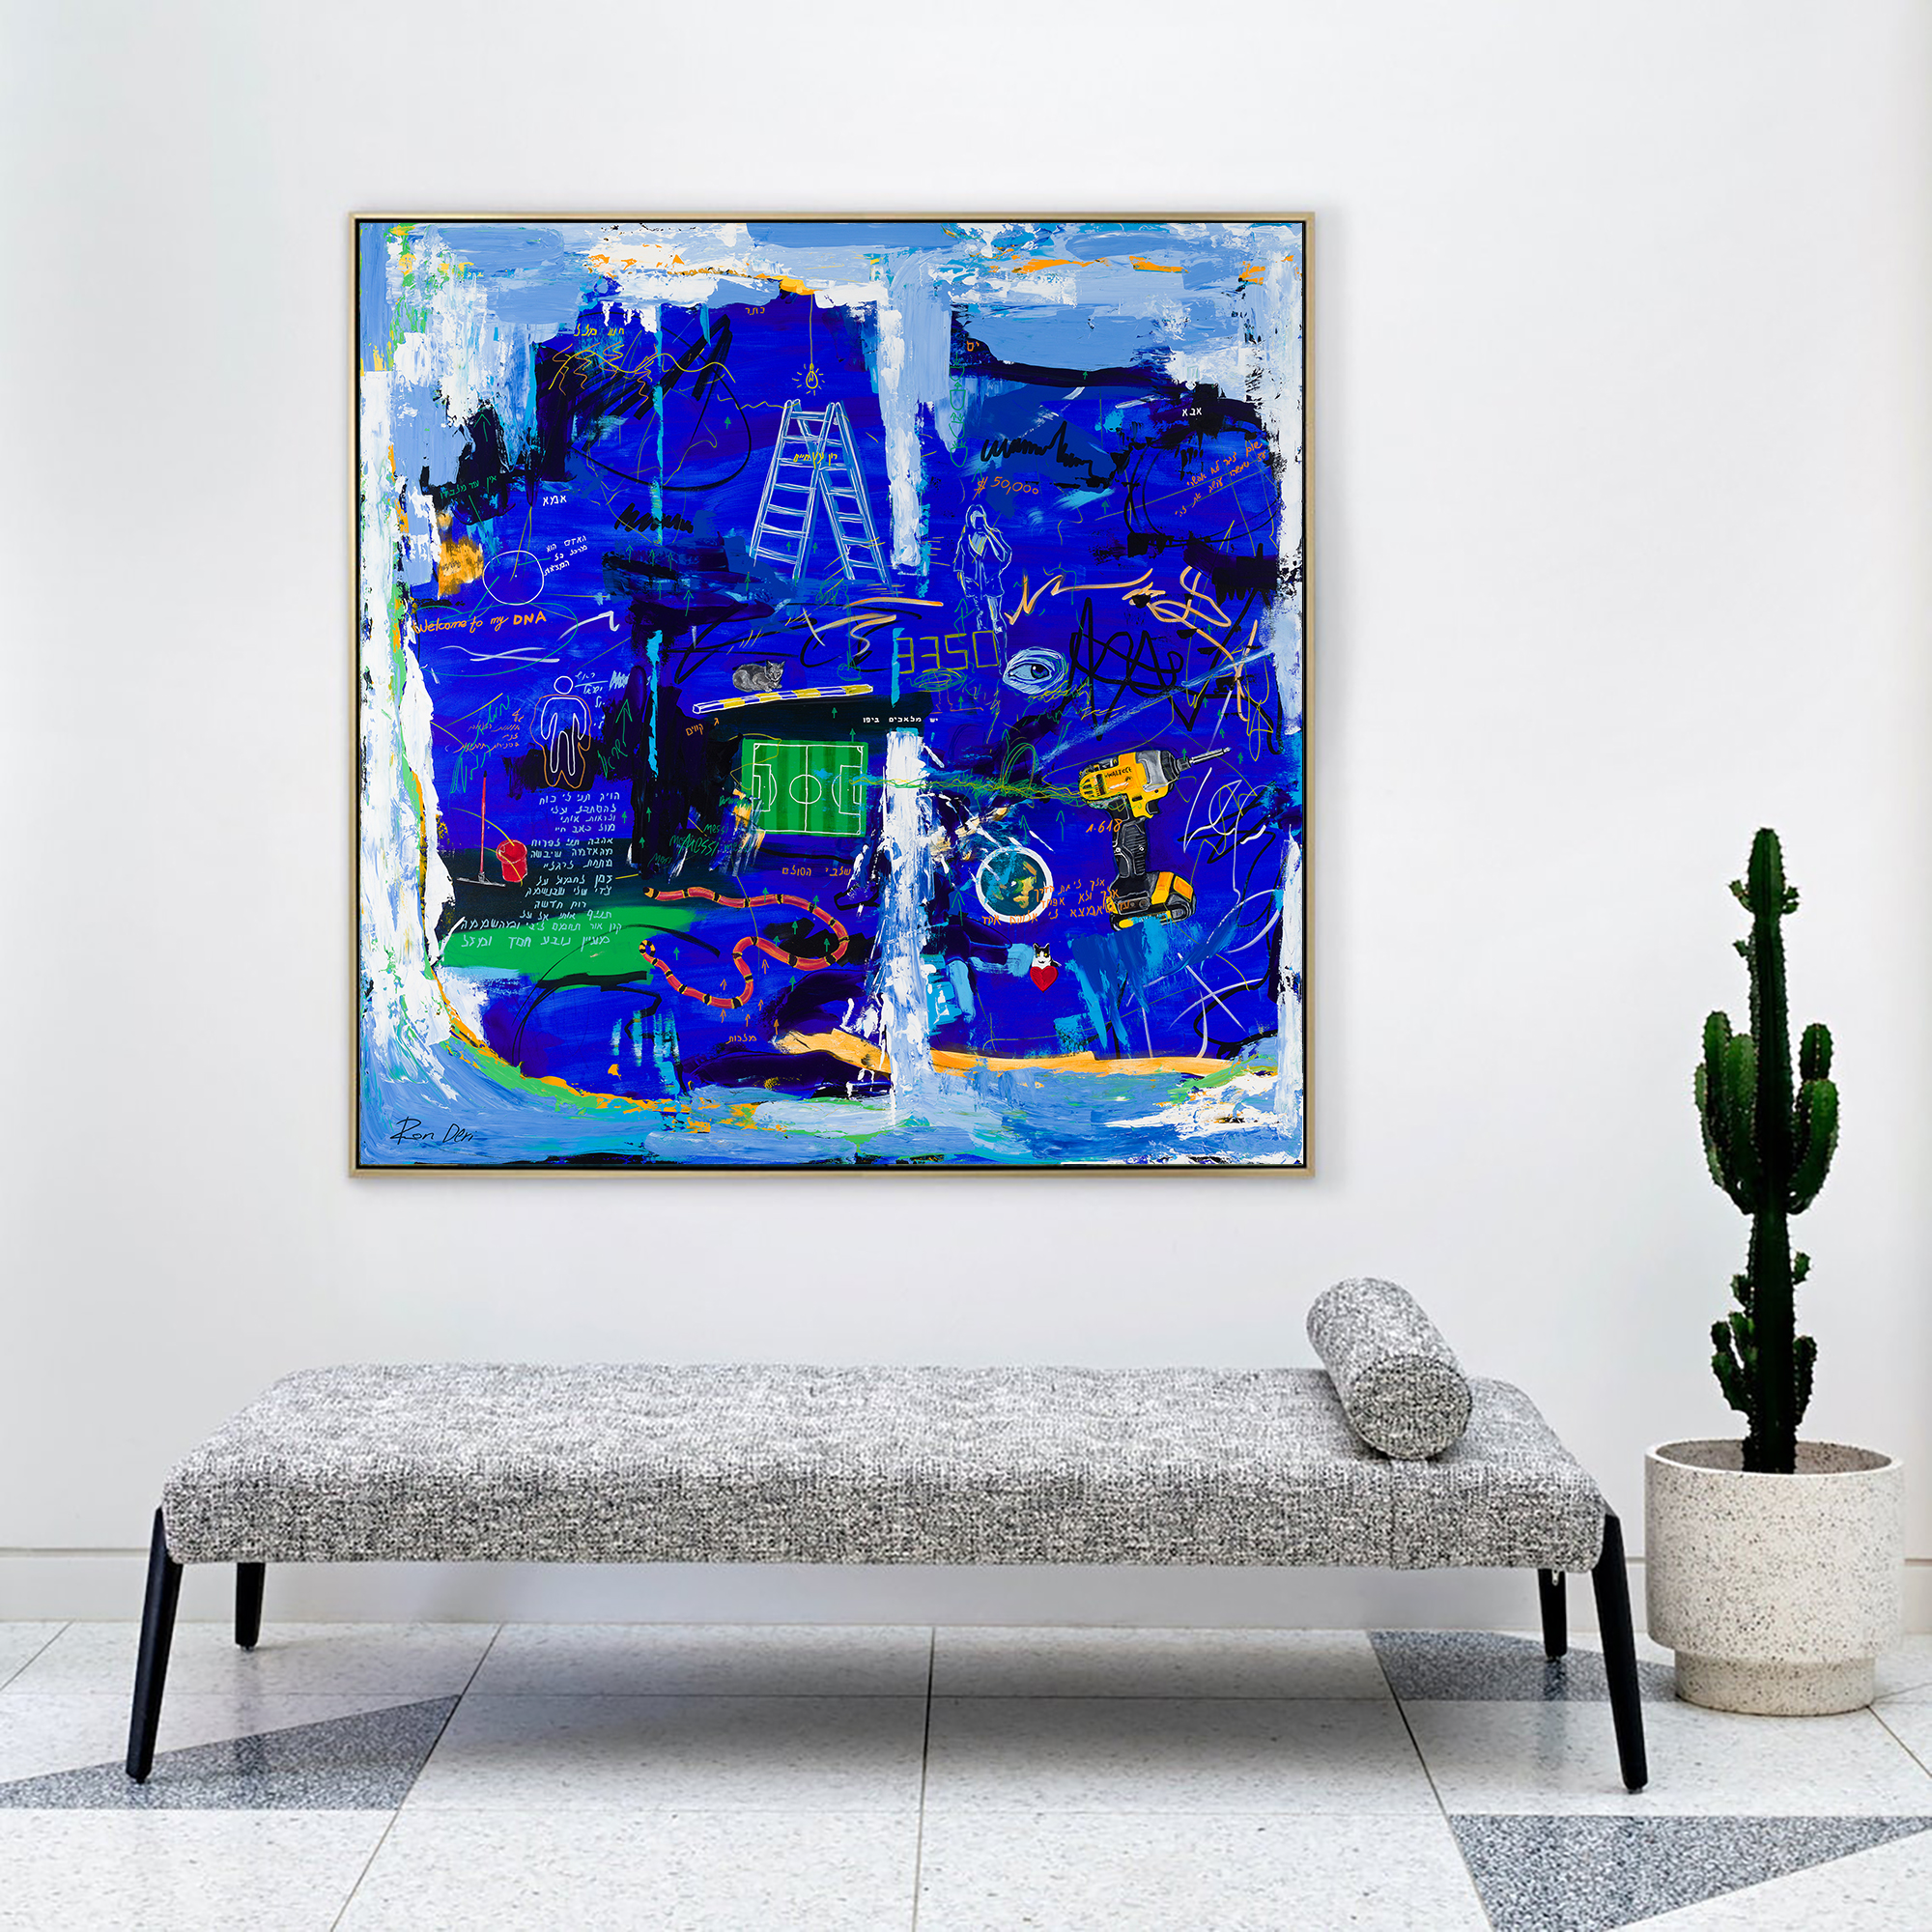 large-abstract-painting-on-canvas-ron-deri-art